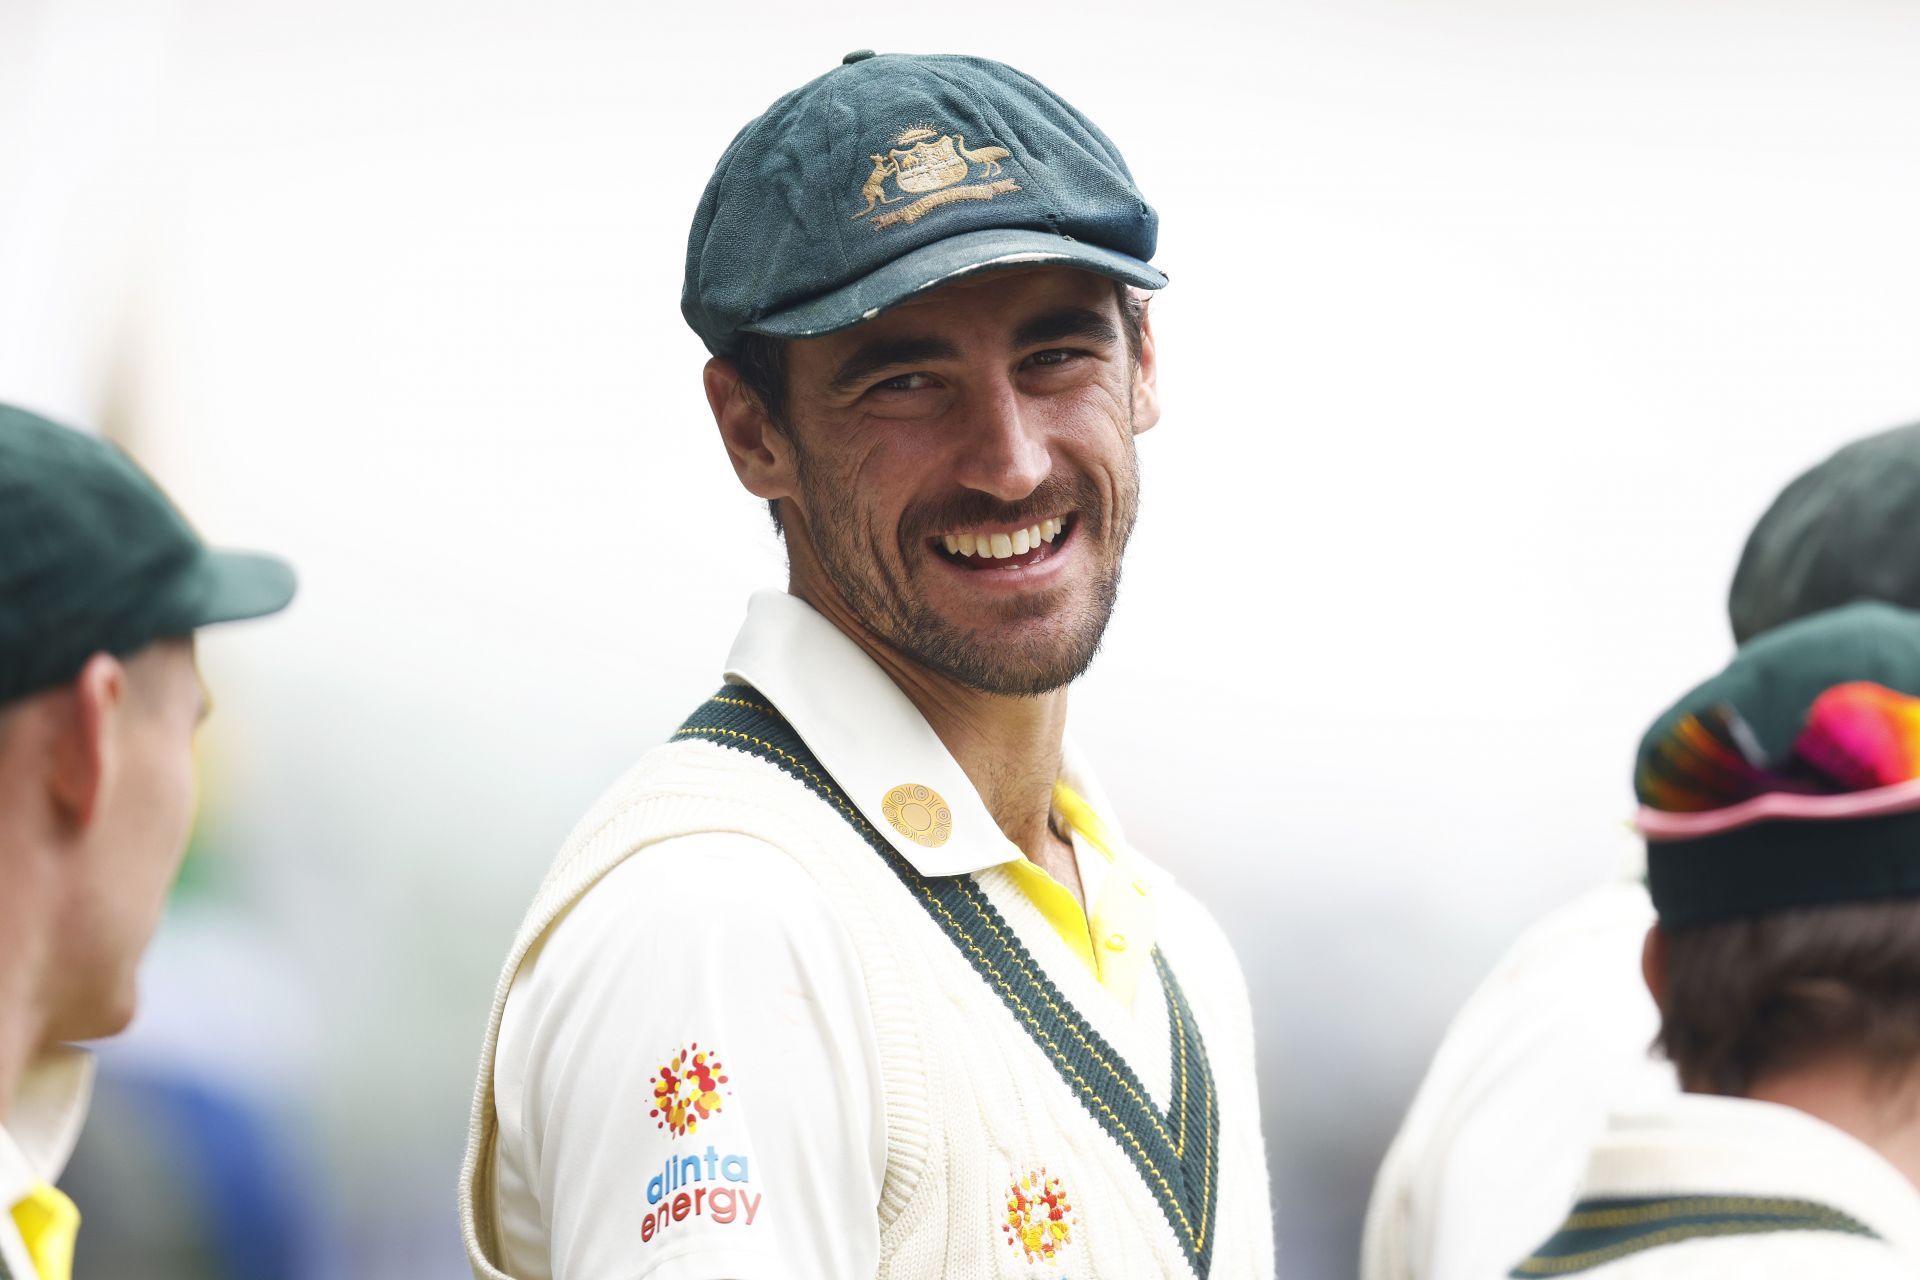 Mitchell Starc has over 300 Test wickets. (Credits: Getty)